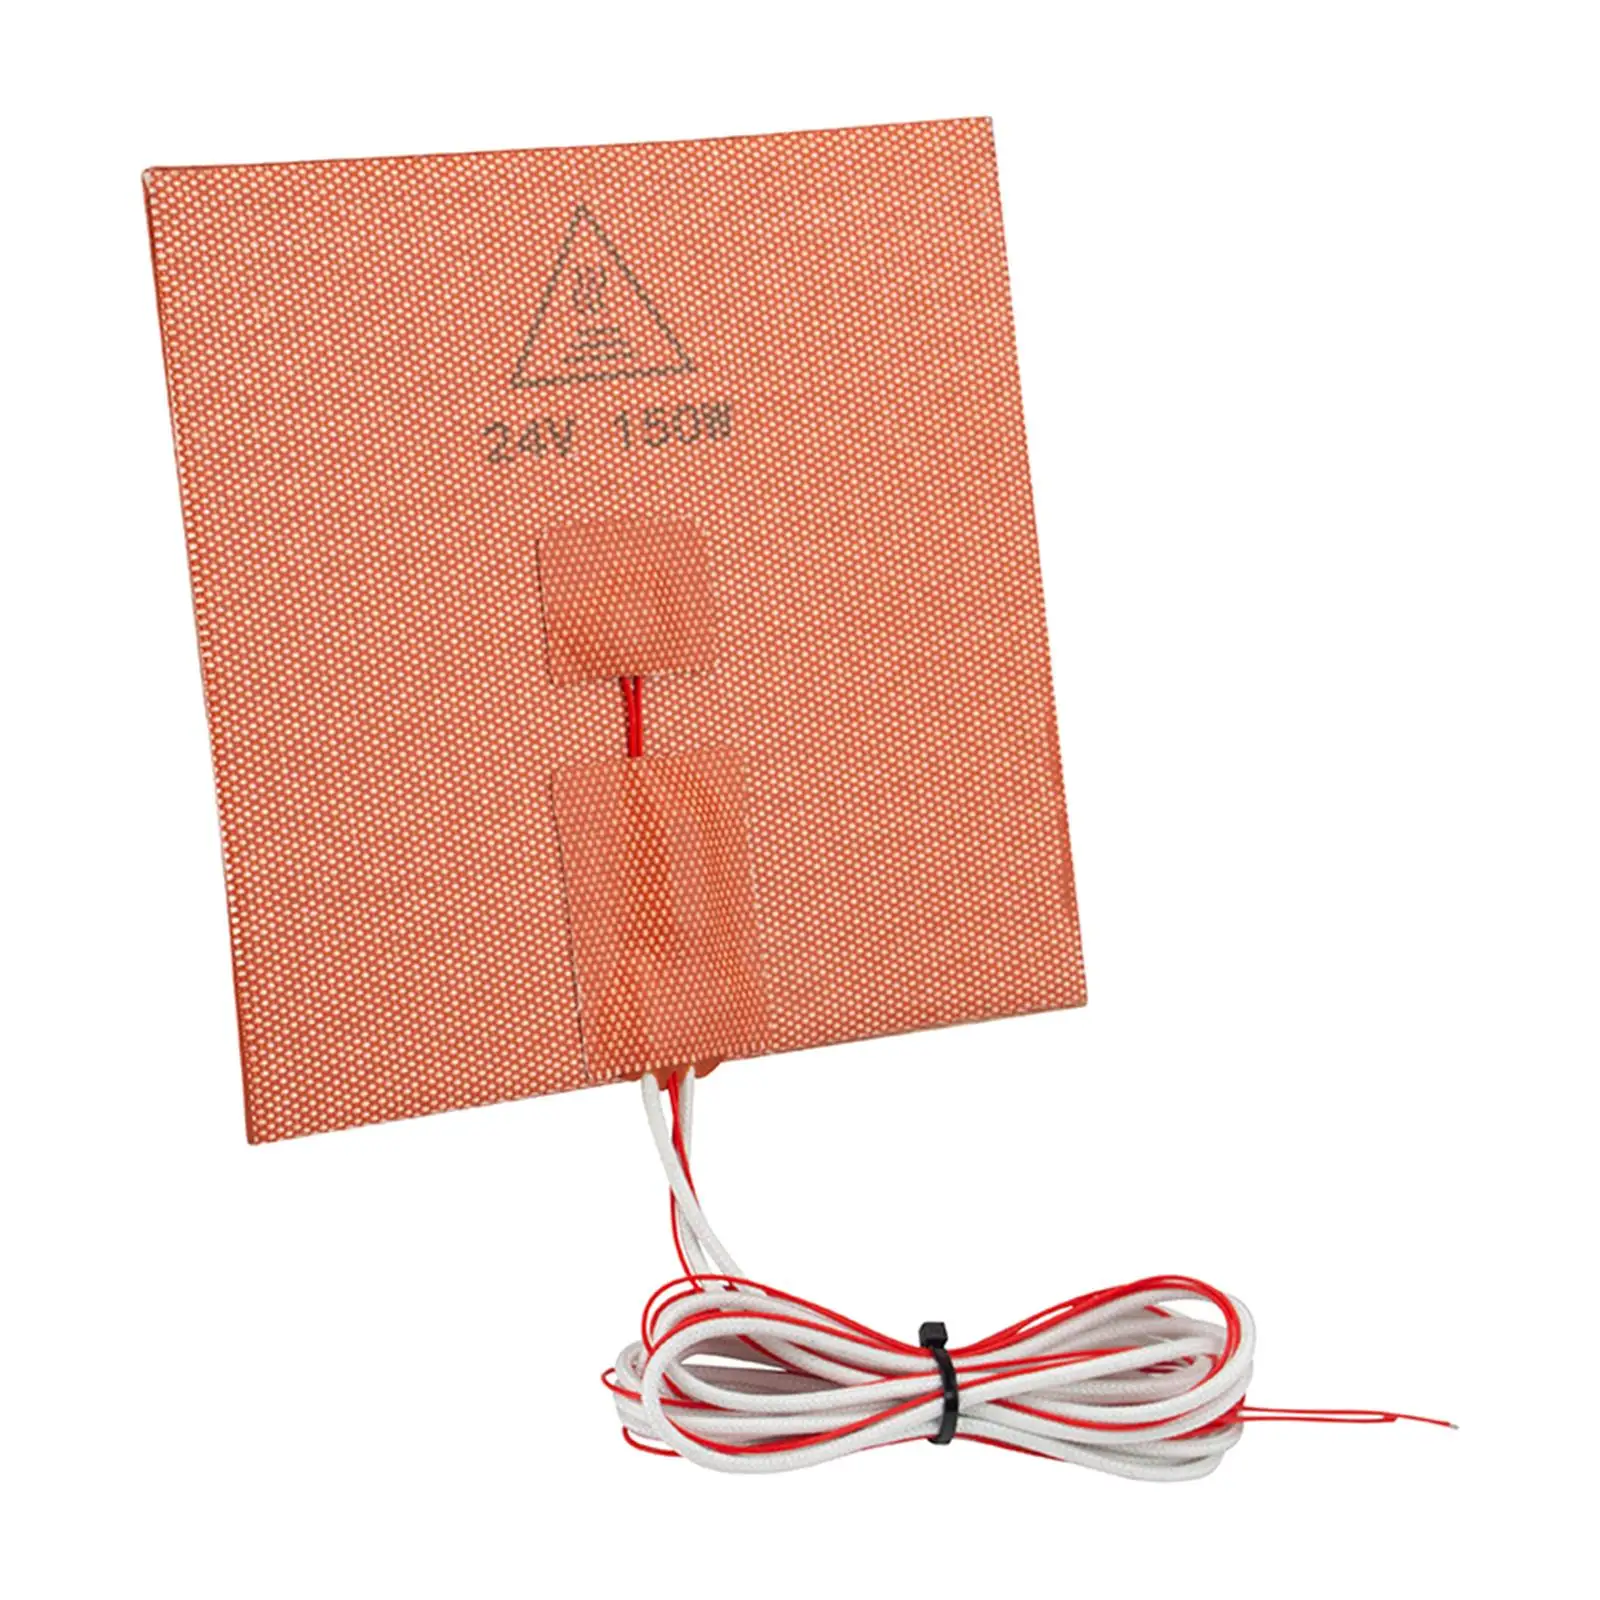 Silicone Heater Heating Pad 24V 150W for 3D Printer Heating Pad 150Mmx150mm with 3M Adhesive